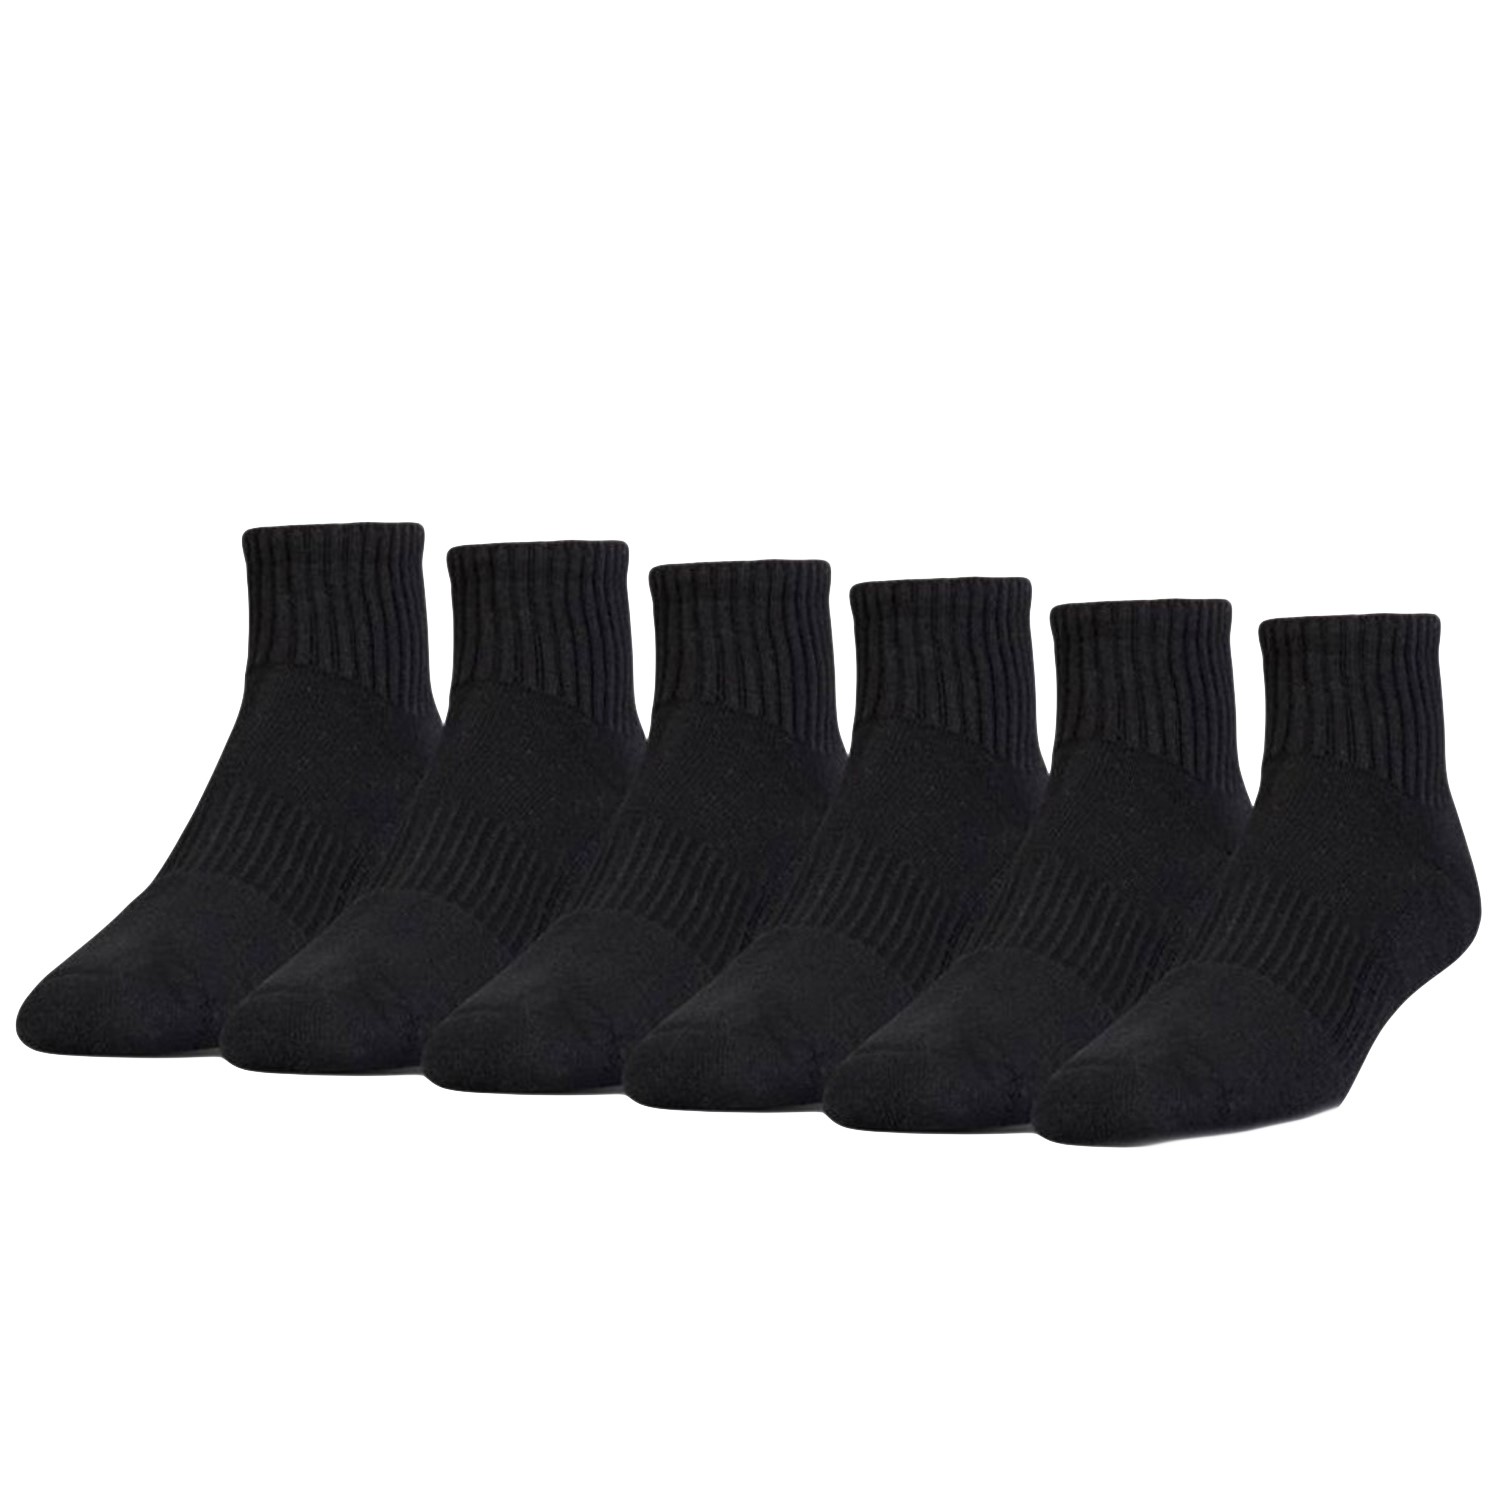 Under Armour Charged Cotton Quarter Socks